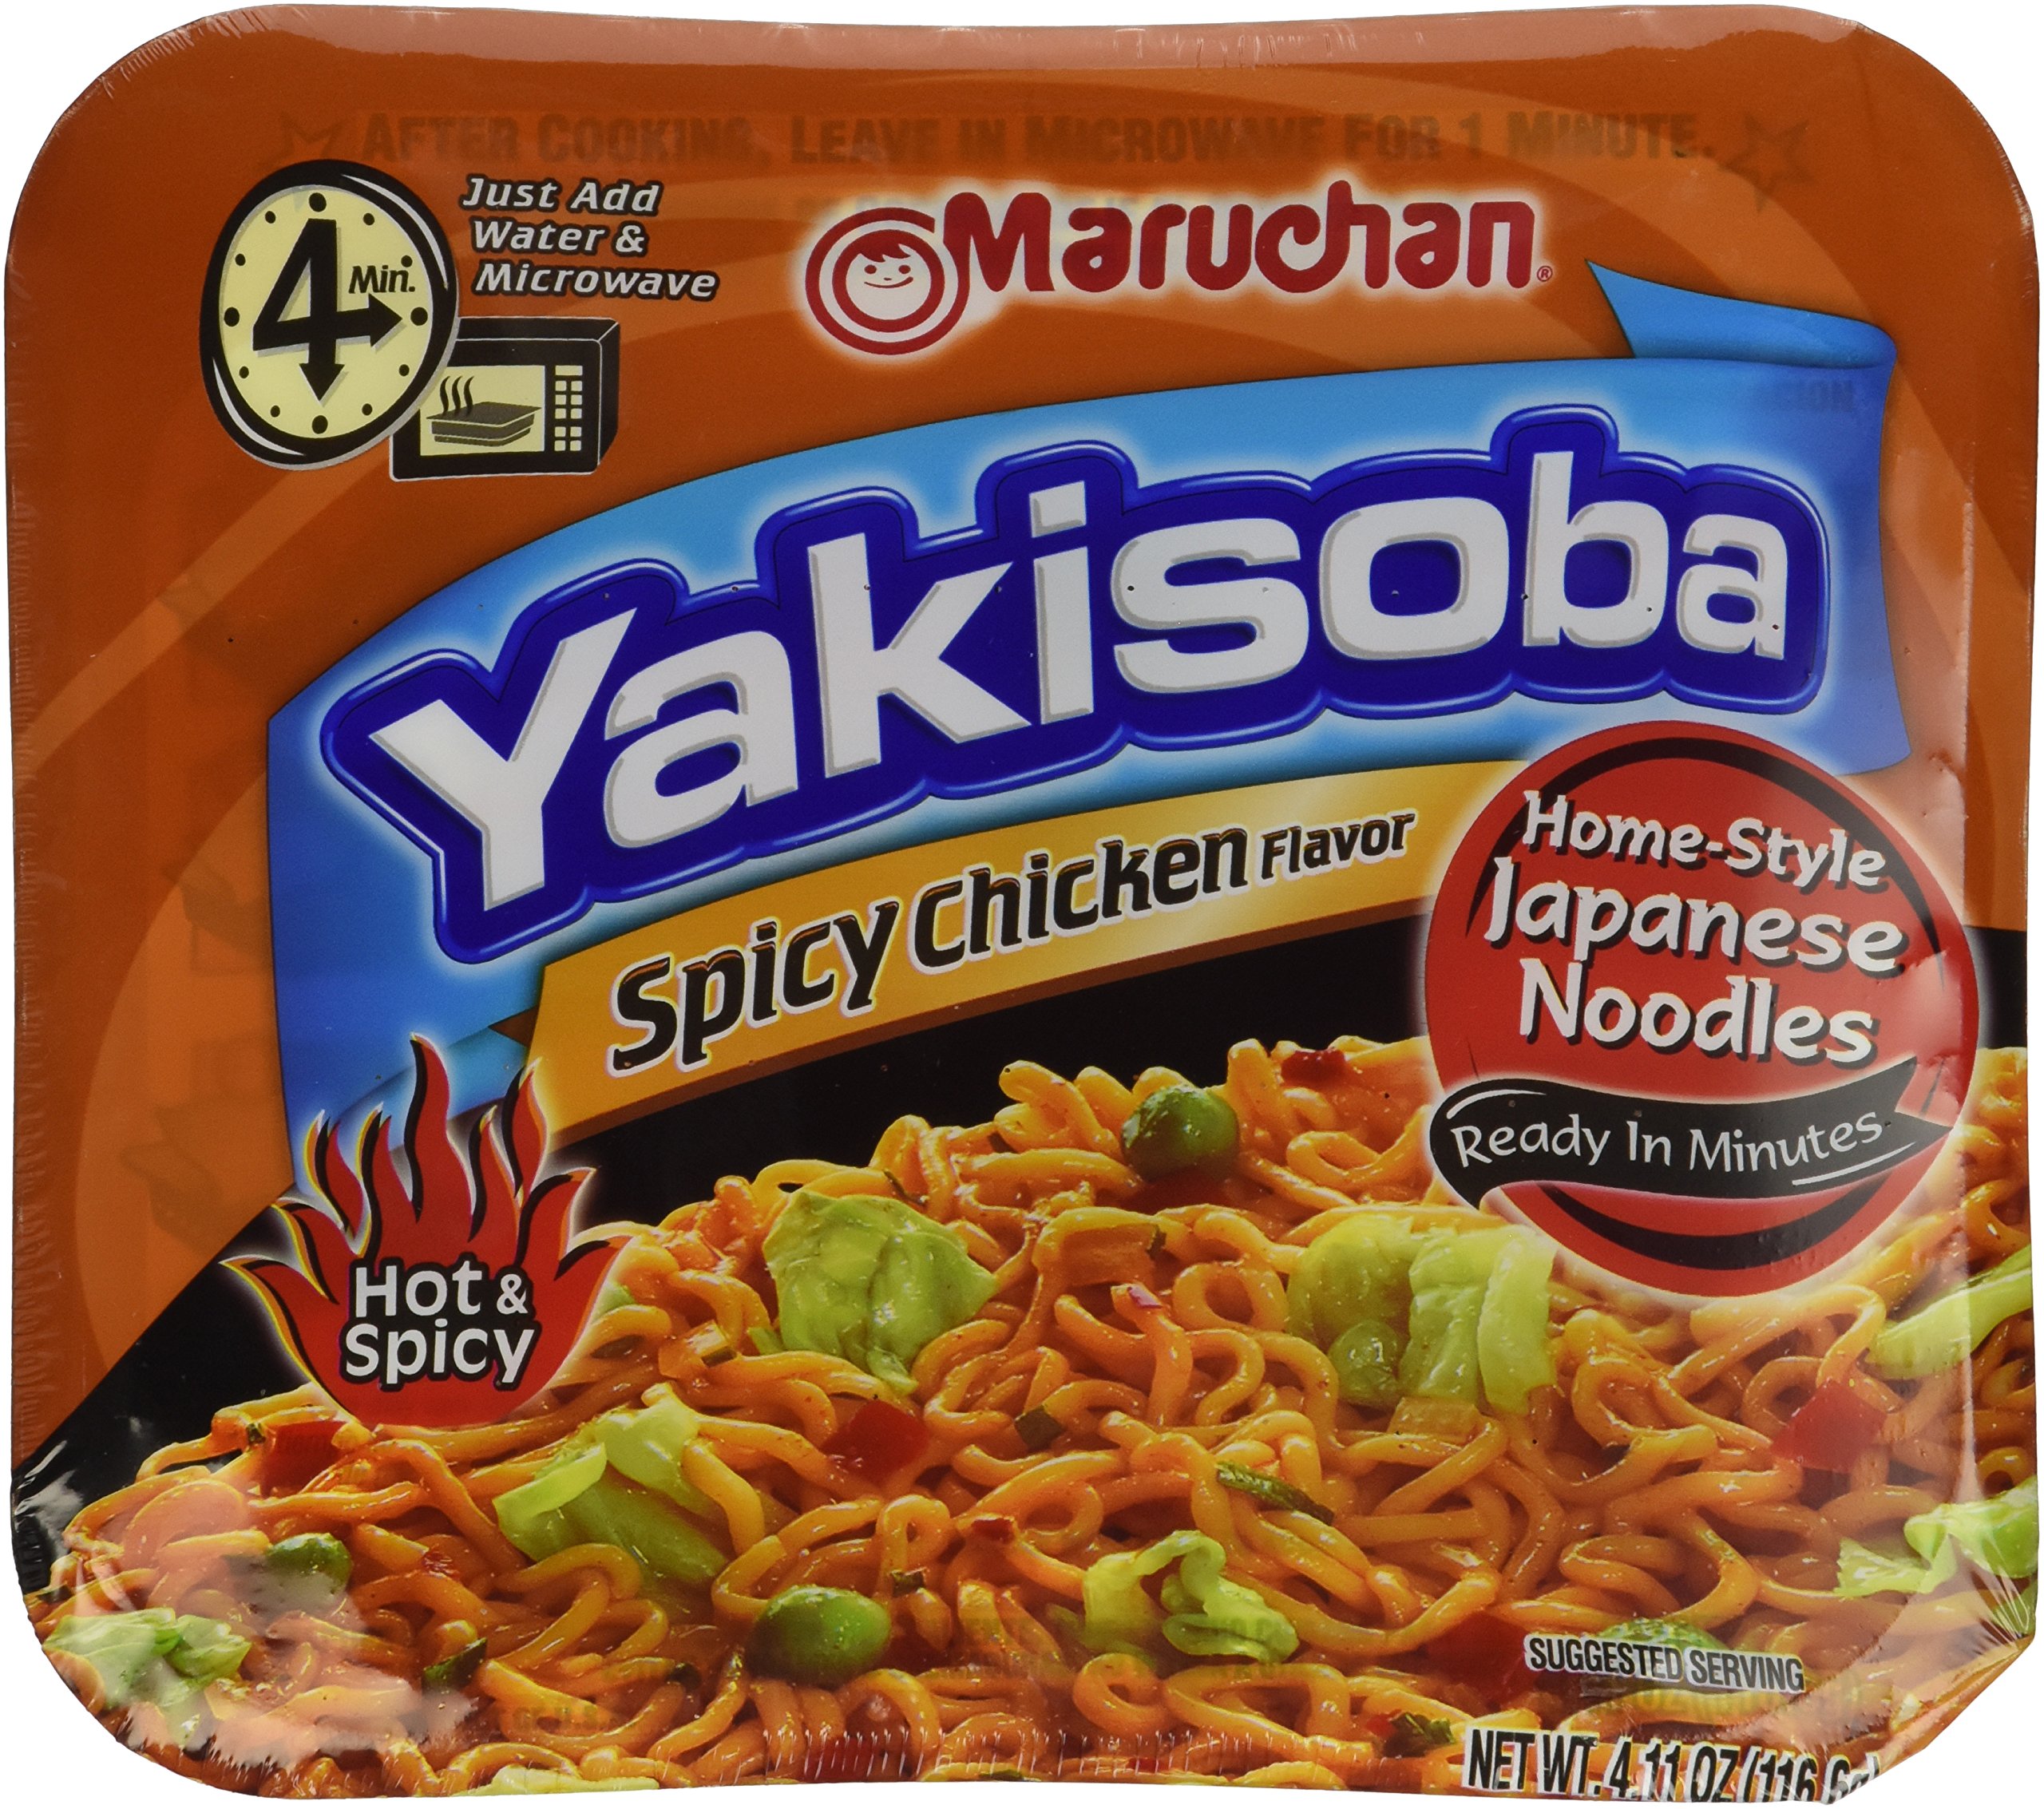 8-Pack 4.11-Oz Maruchan Yakisoba Spicy Chicken Flavor Noodles $7.15 + Free Shipping w/ Prime or on $35+